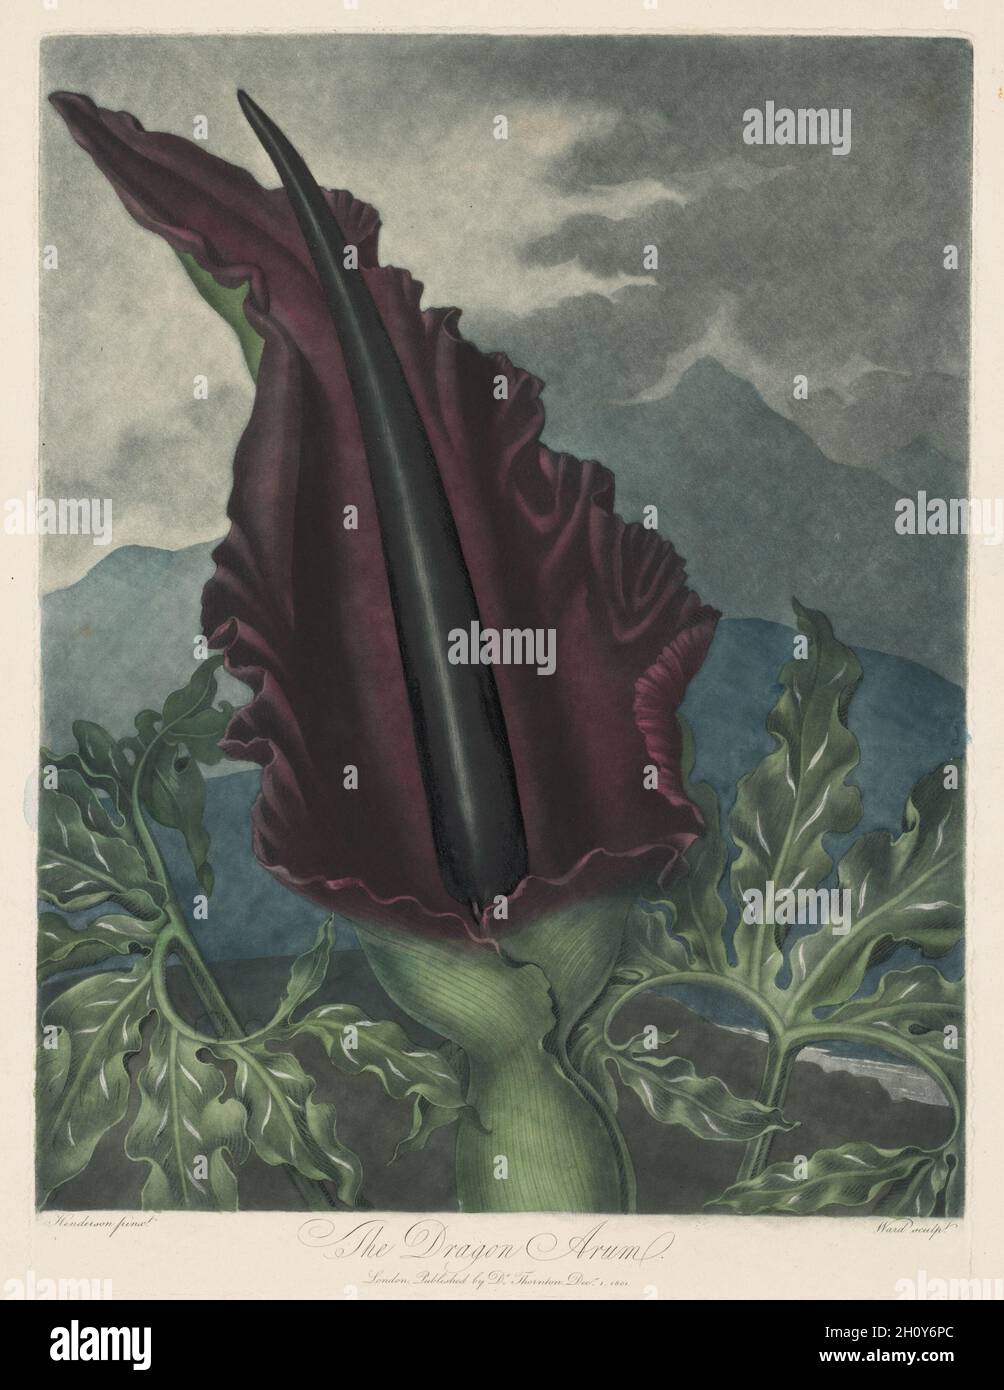 The Dragon Arum, Black Calla or Solomon's Lily, 1799-1807. Robert John Thornton (British, 1768-1837), William Ward (British, 1776-1826). Mezzotint;  In the 18th century, new engraving and etching techniques offered a variety of tonal effects that enhanced botanical prints. While mezzotint (in which the plate is roughened and then the engraver works from dark to light creating different values) and stipple (dots create values) make it possible to create the rich tonal scale and velvety texture of oil paint, aquatint imitates the delicacy and transparency of watercolor and ink wash. Stock Photo